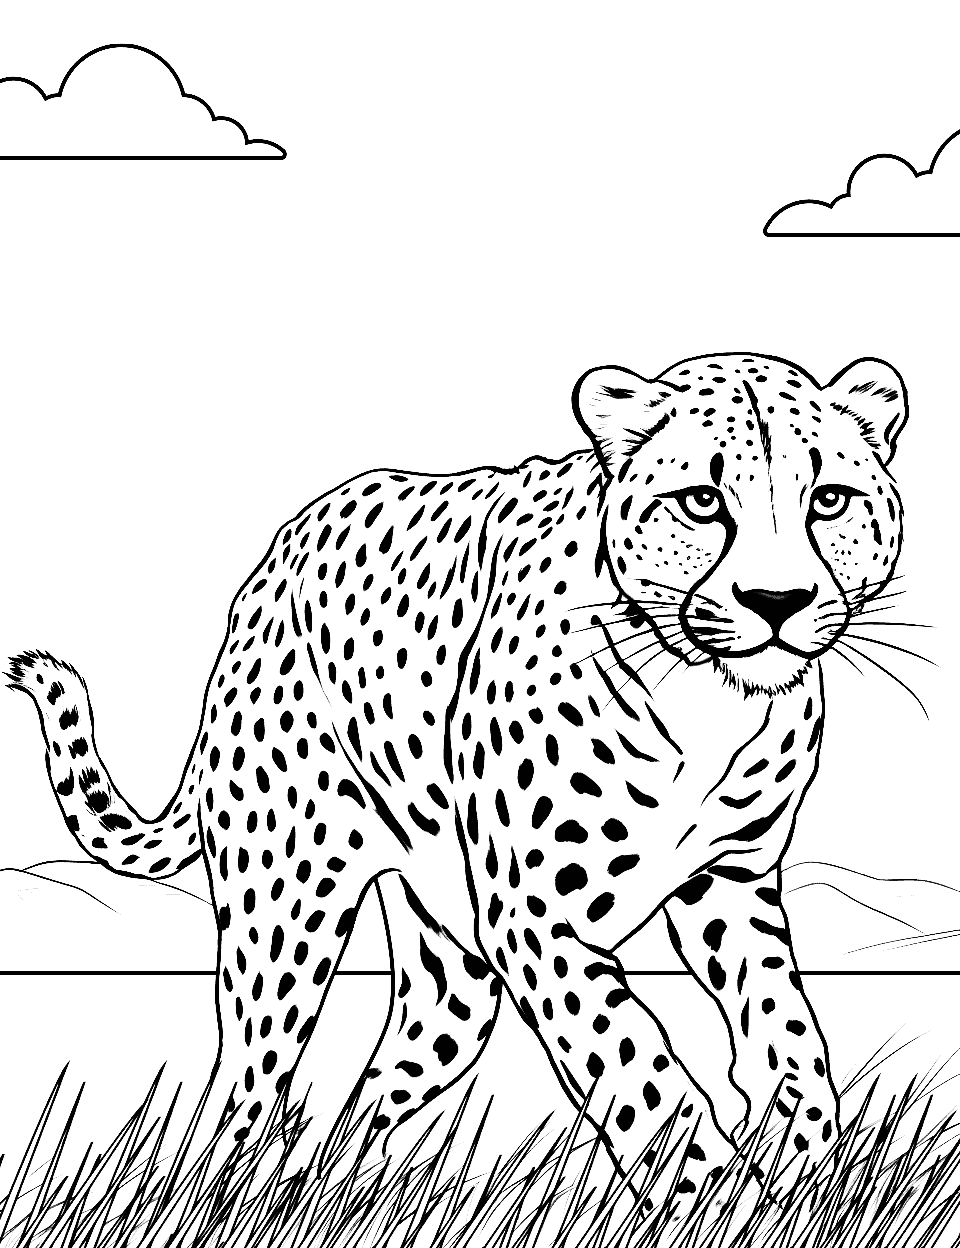 Cheetah Chasing Prey Coloring Page - An action-packed scene of a cheetah chasing after its prey.